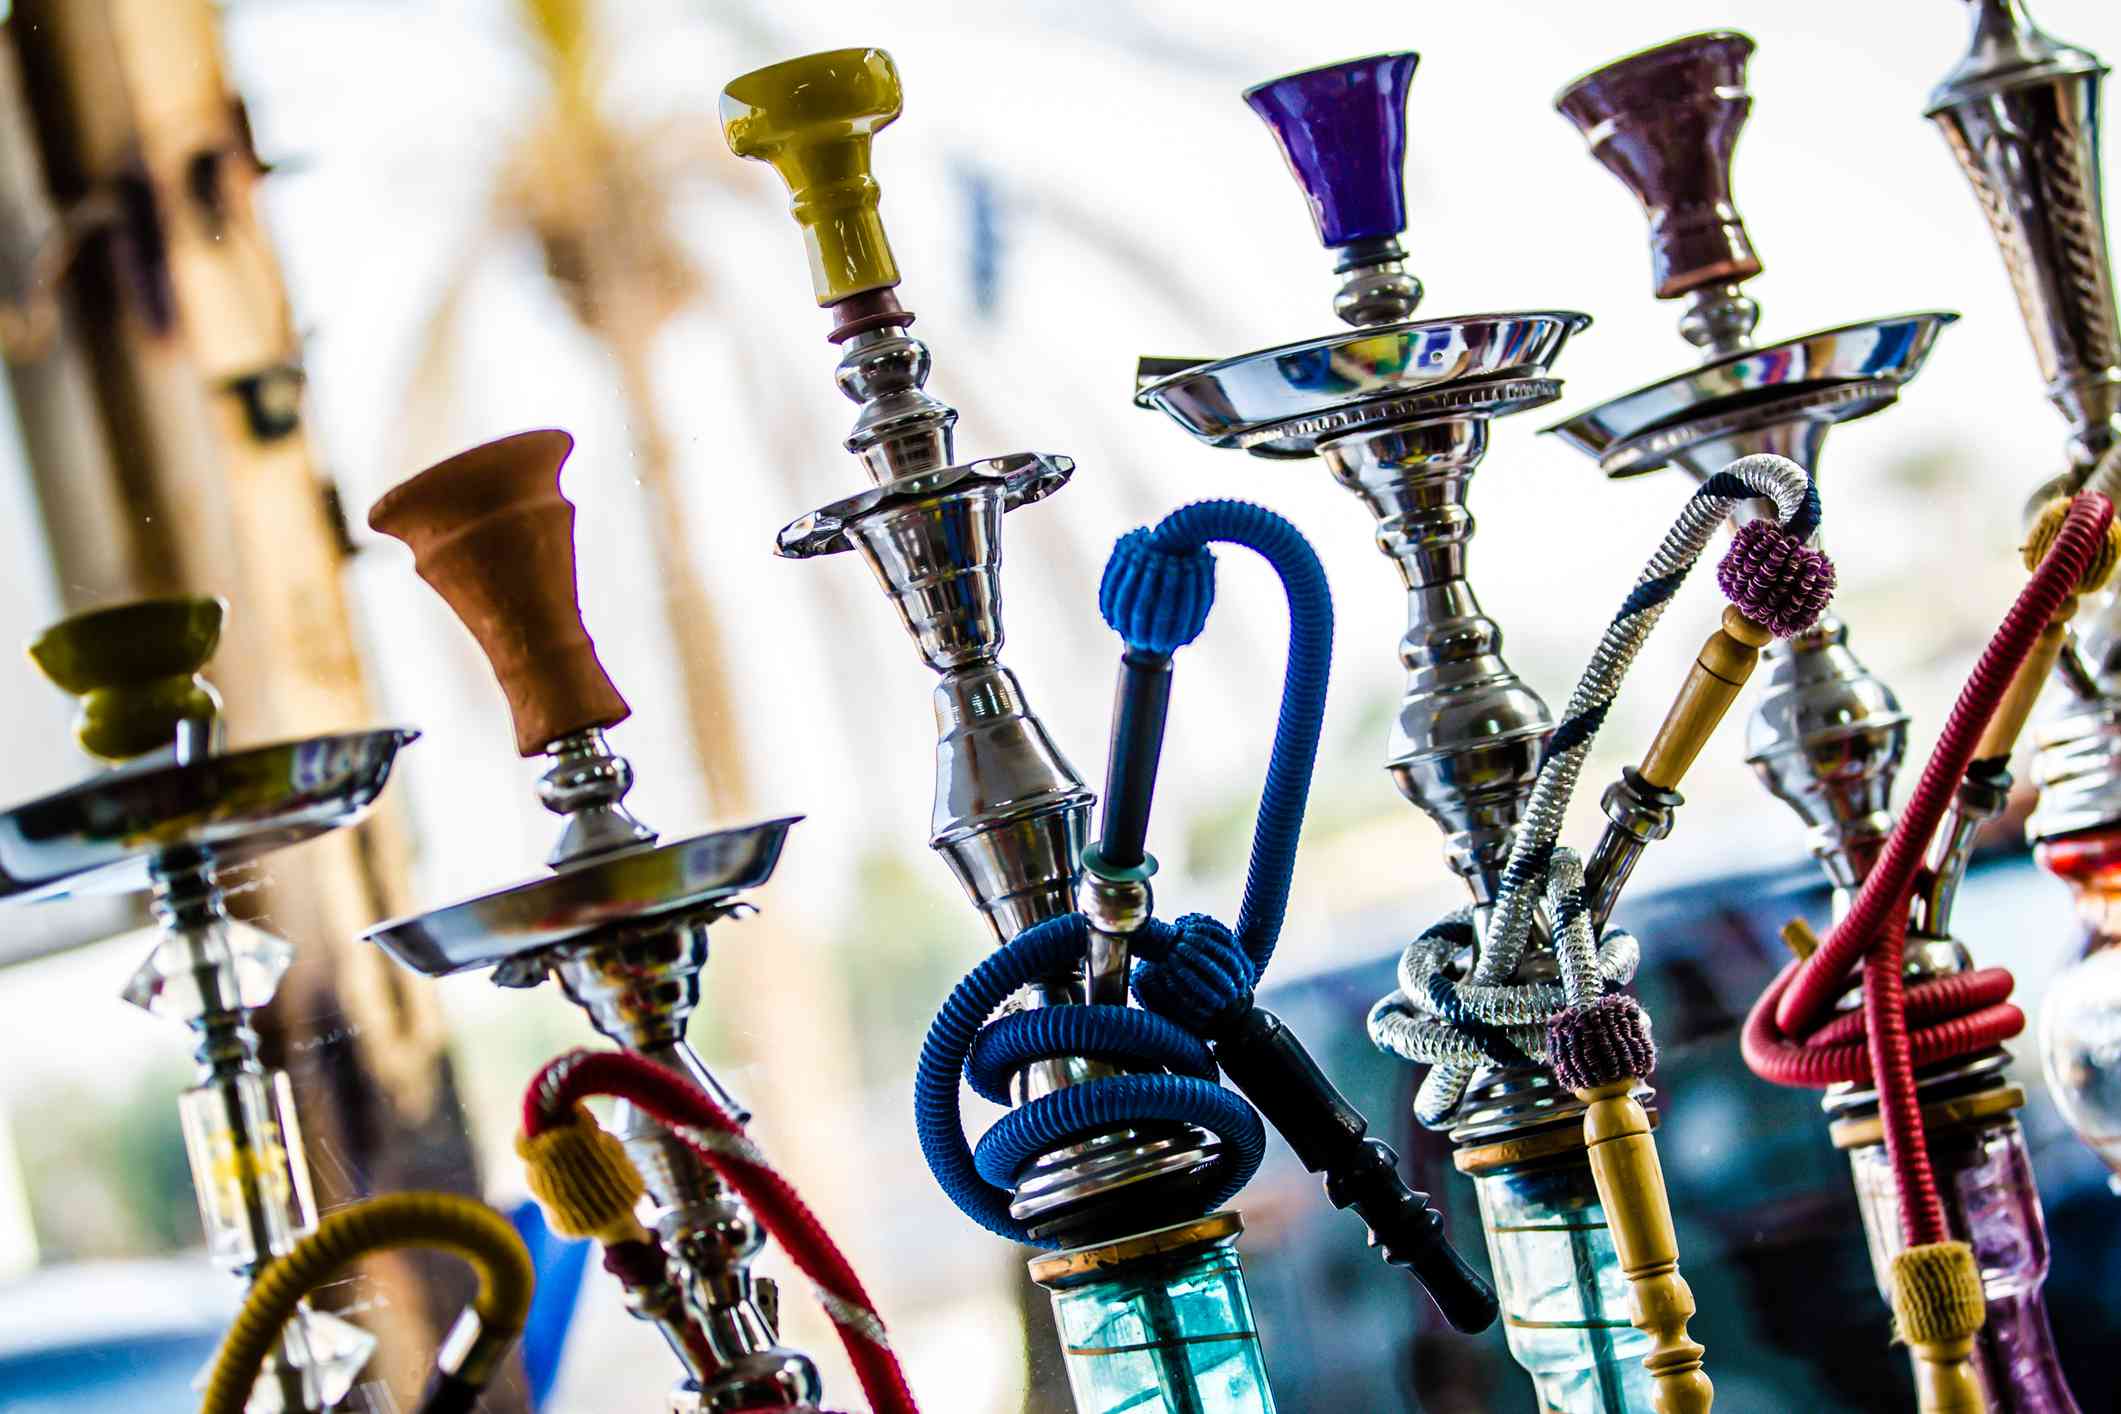 Koress Hookah: Achieving Perfect Smoke with the Right Hookah Set Up